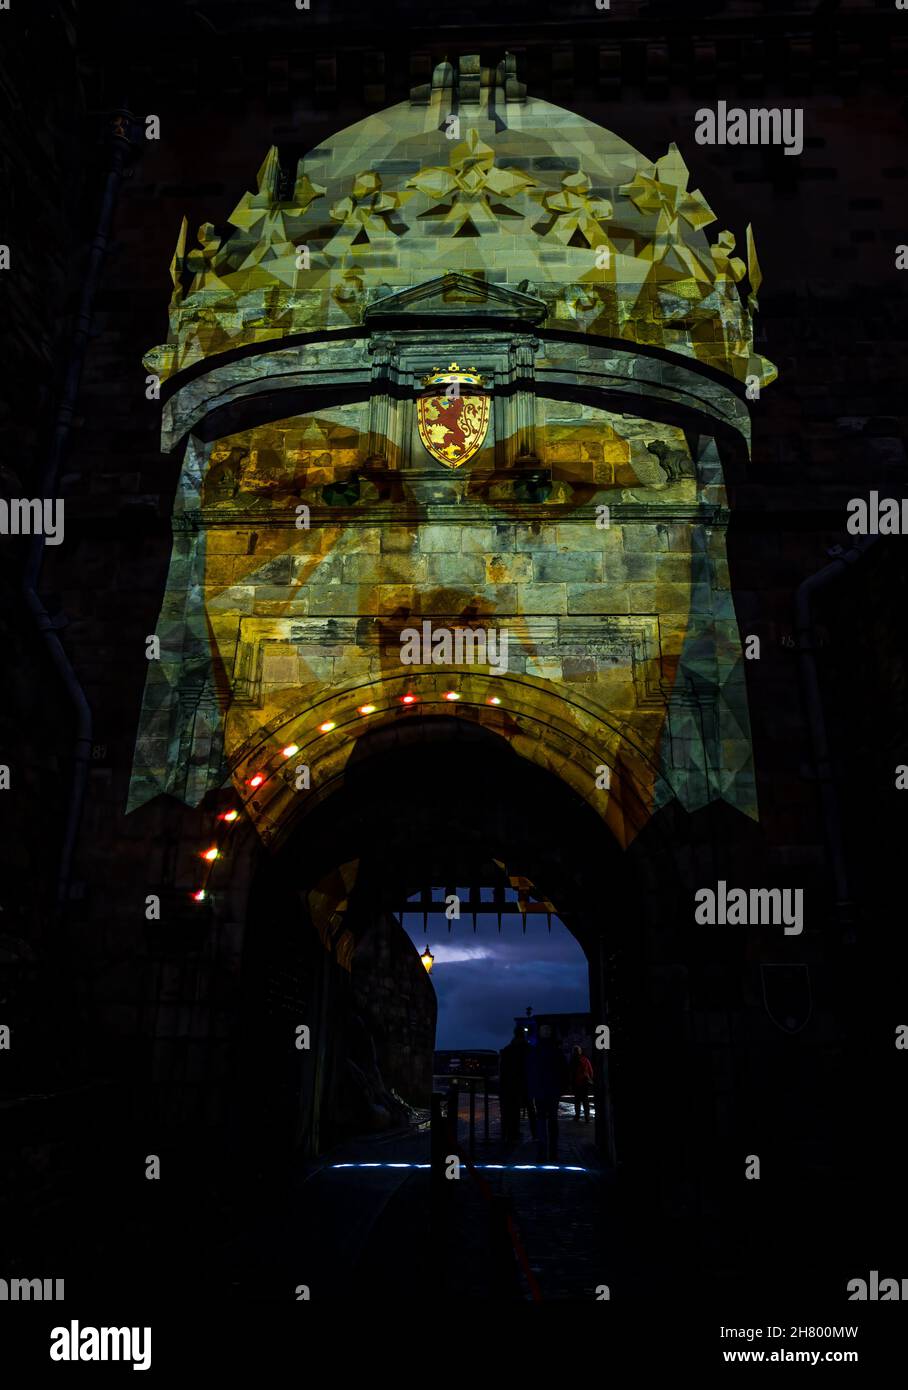 Castle of Light image projection of king with crown on portcullis gateway at night time, Edinburgh castle, Scotland, UK Stock Photo